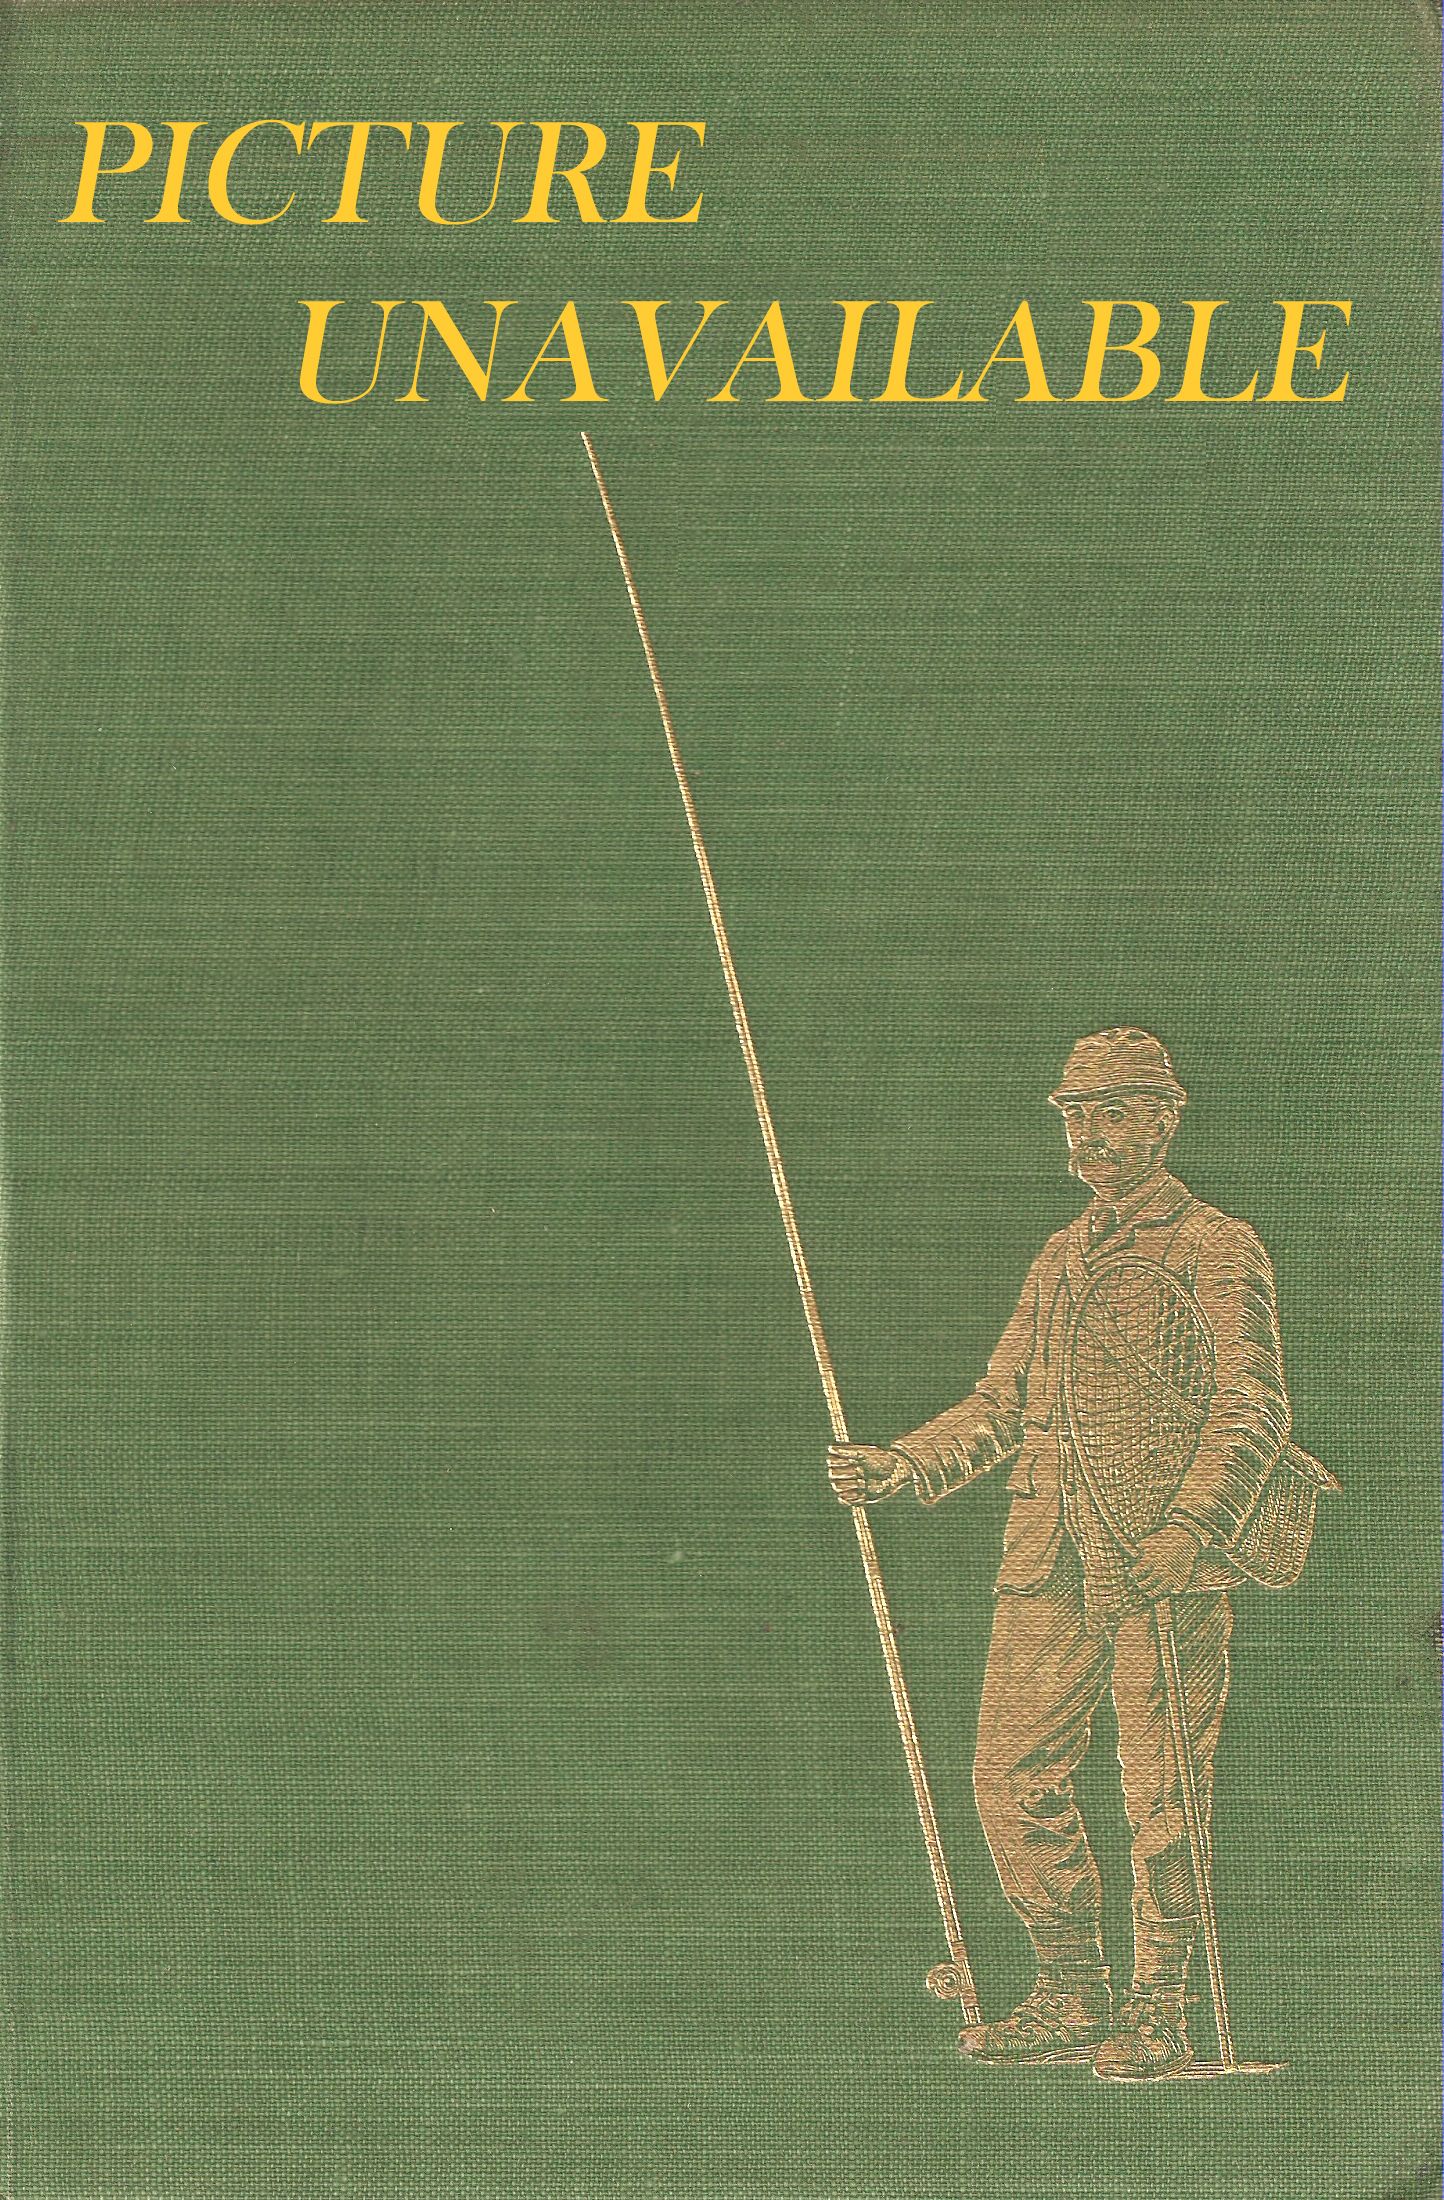 ANGLING: SINGLE AND DOUBLE-HANDED CAST. By R.D. Hughes.